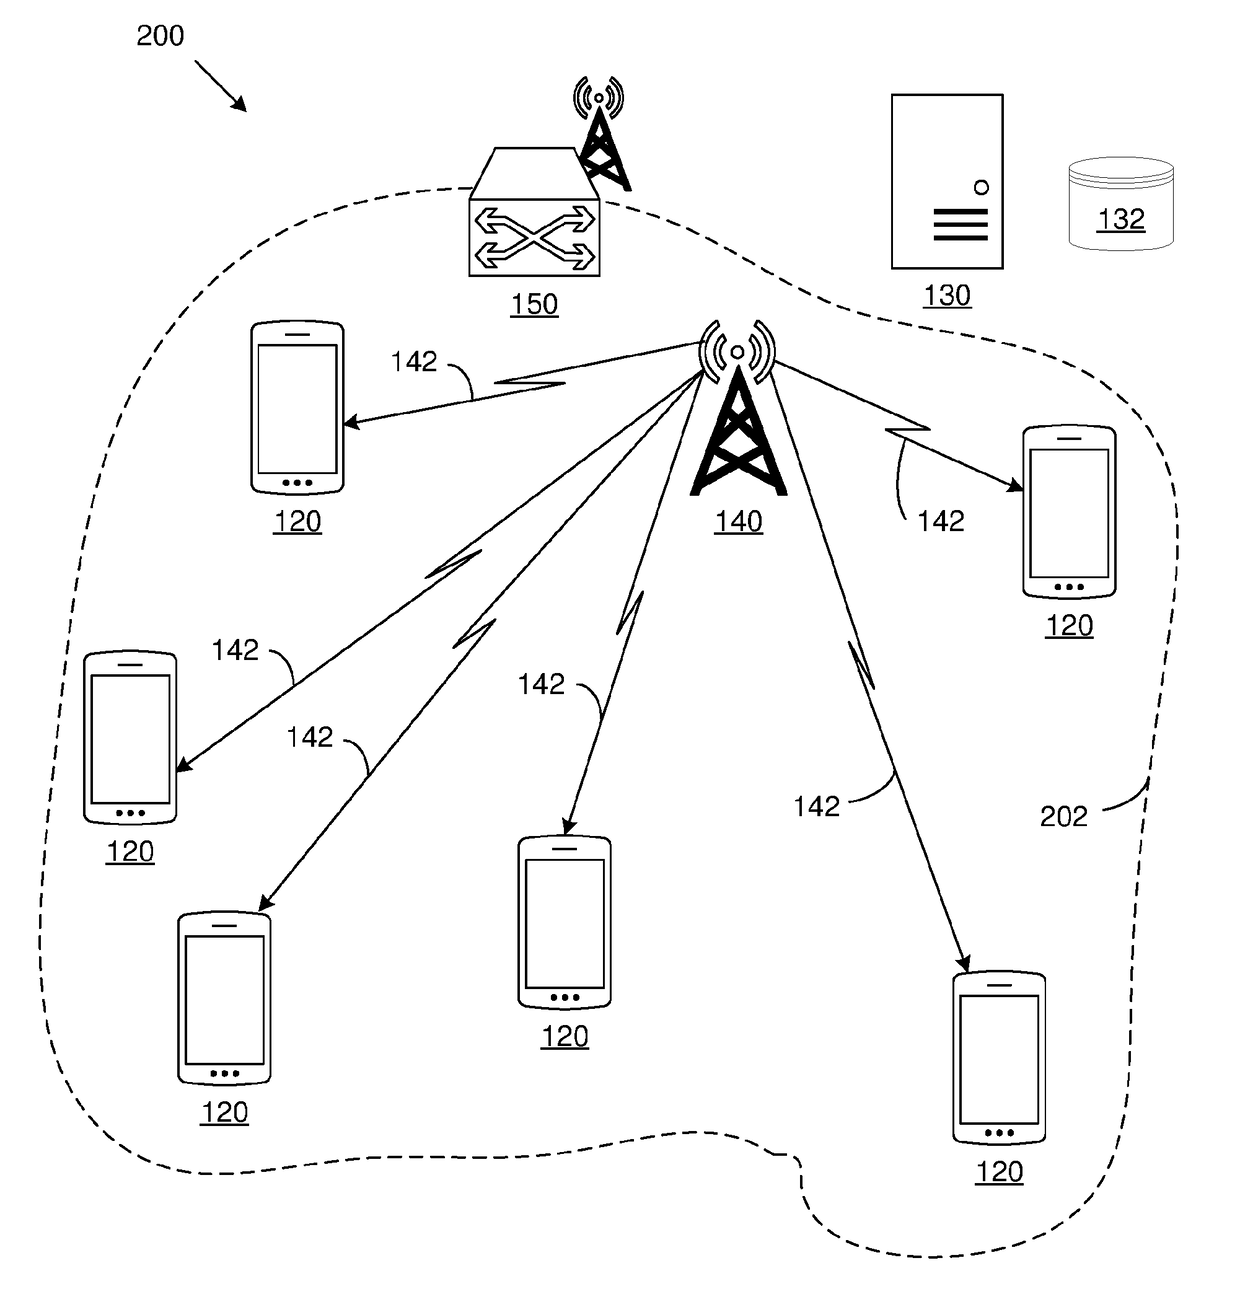 Monitoring changes in an environment by means of communication devices